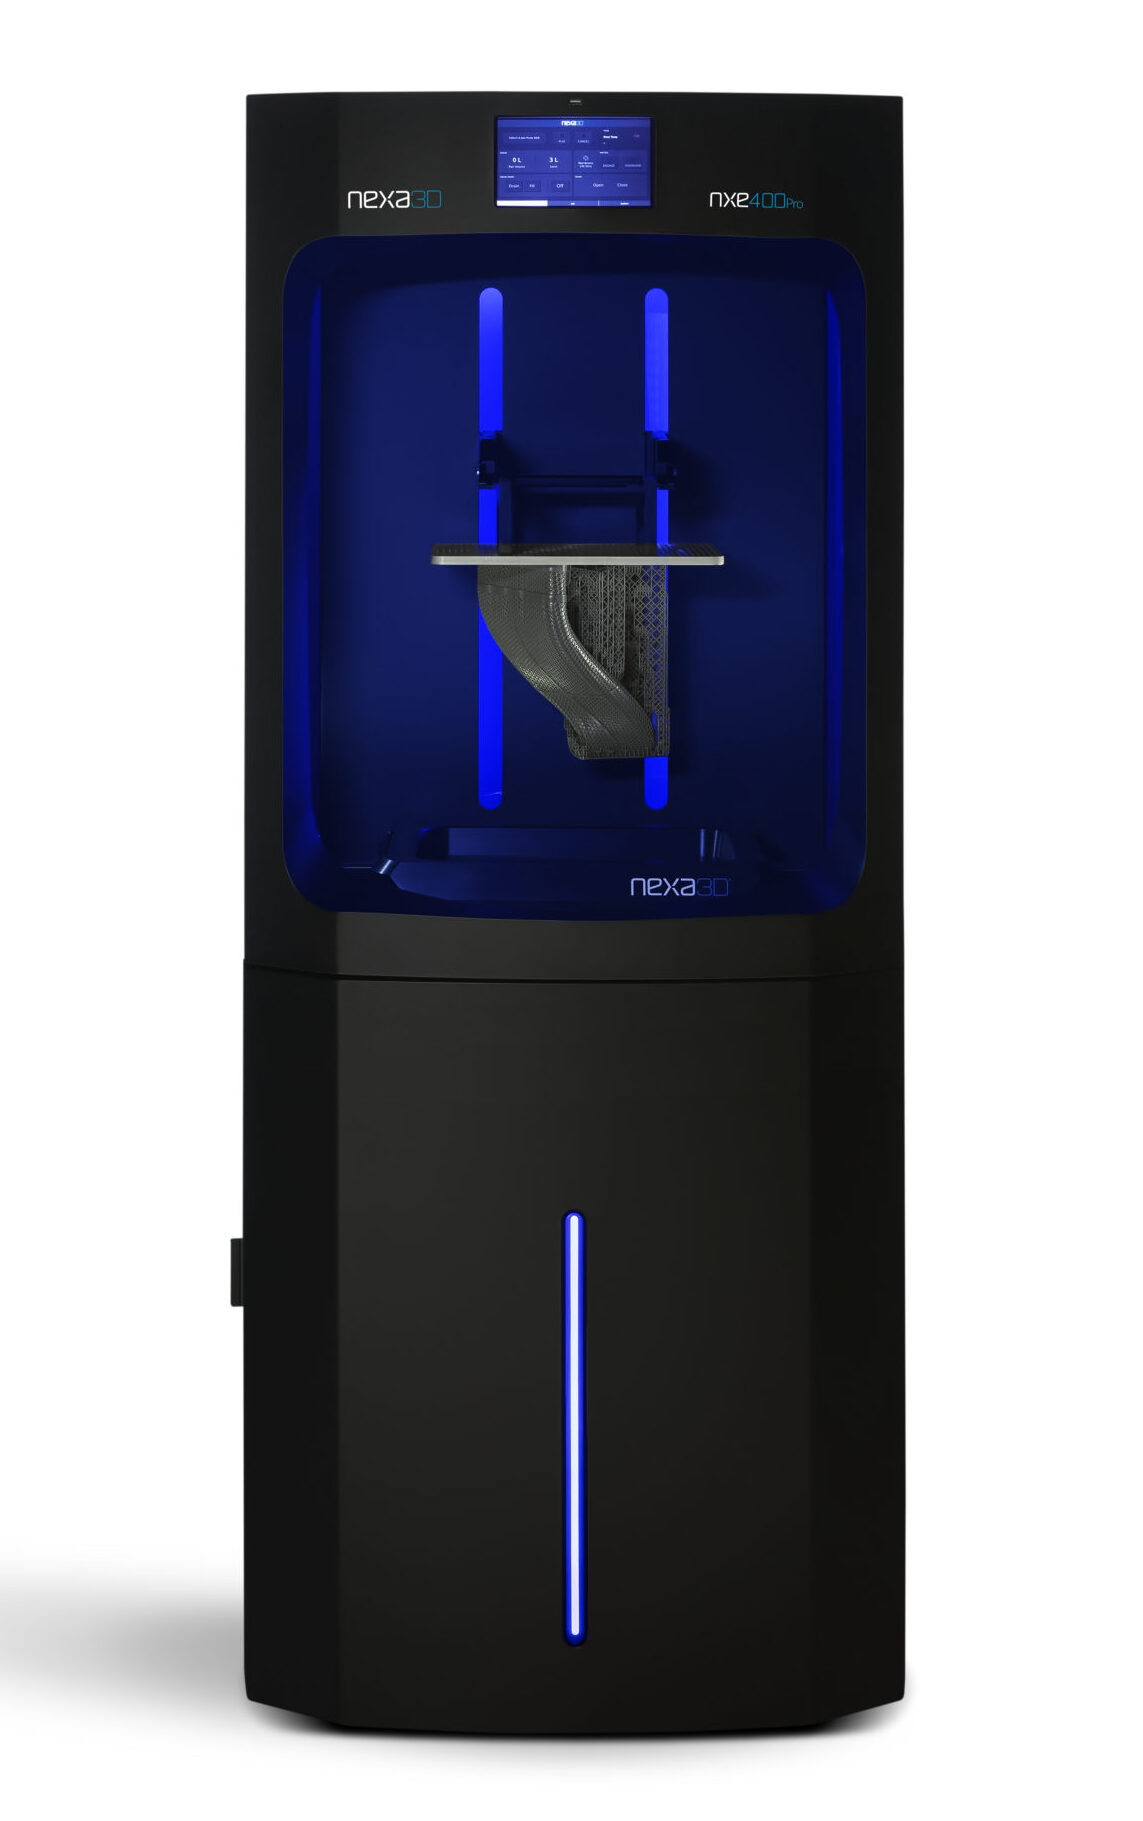 Nexa3D announced the immediate availability of its new Professional Series upgrade for its NXE series printers with higher productivity and part accuracy